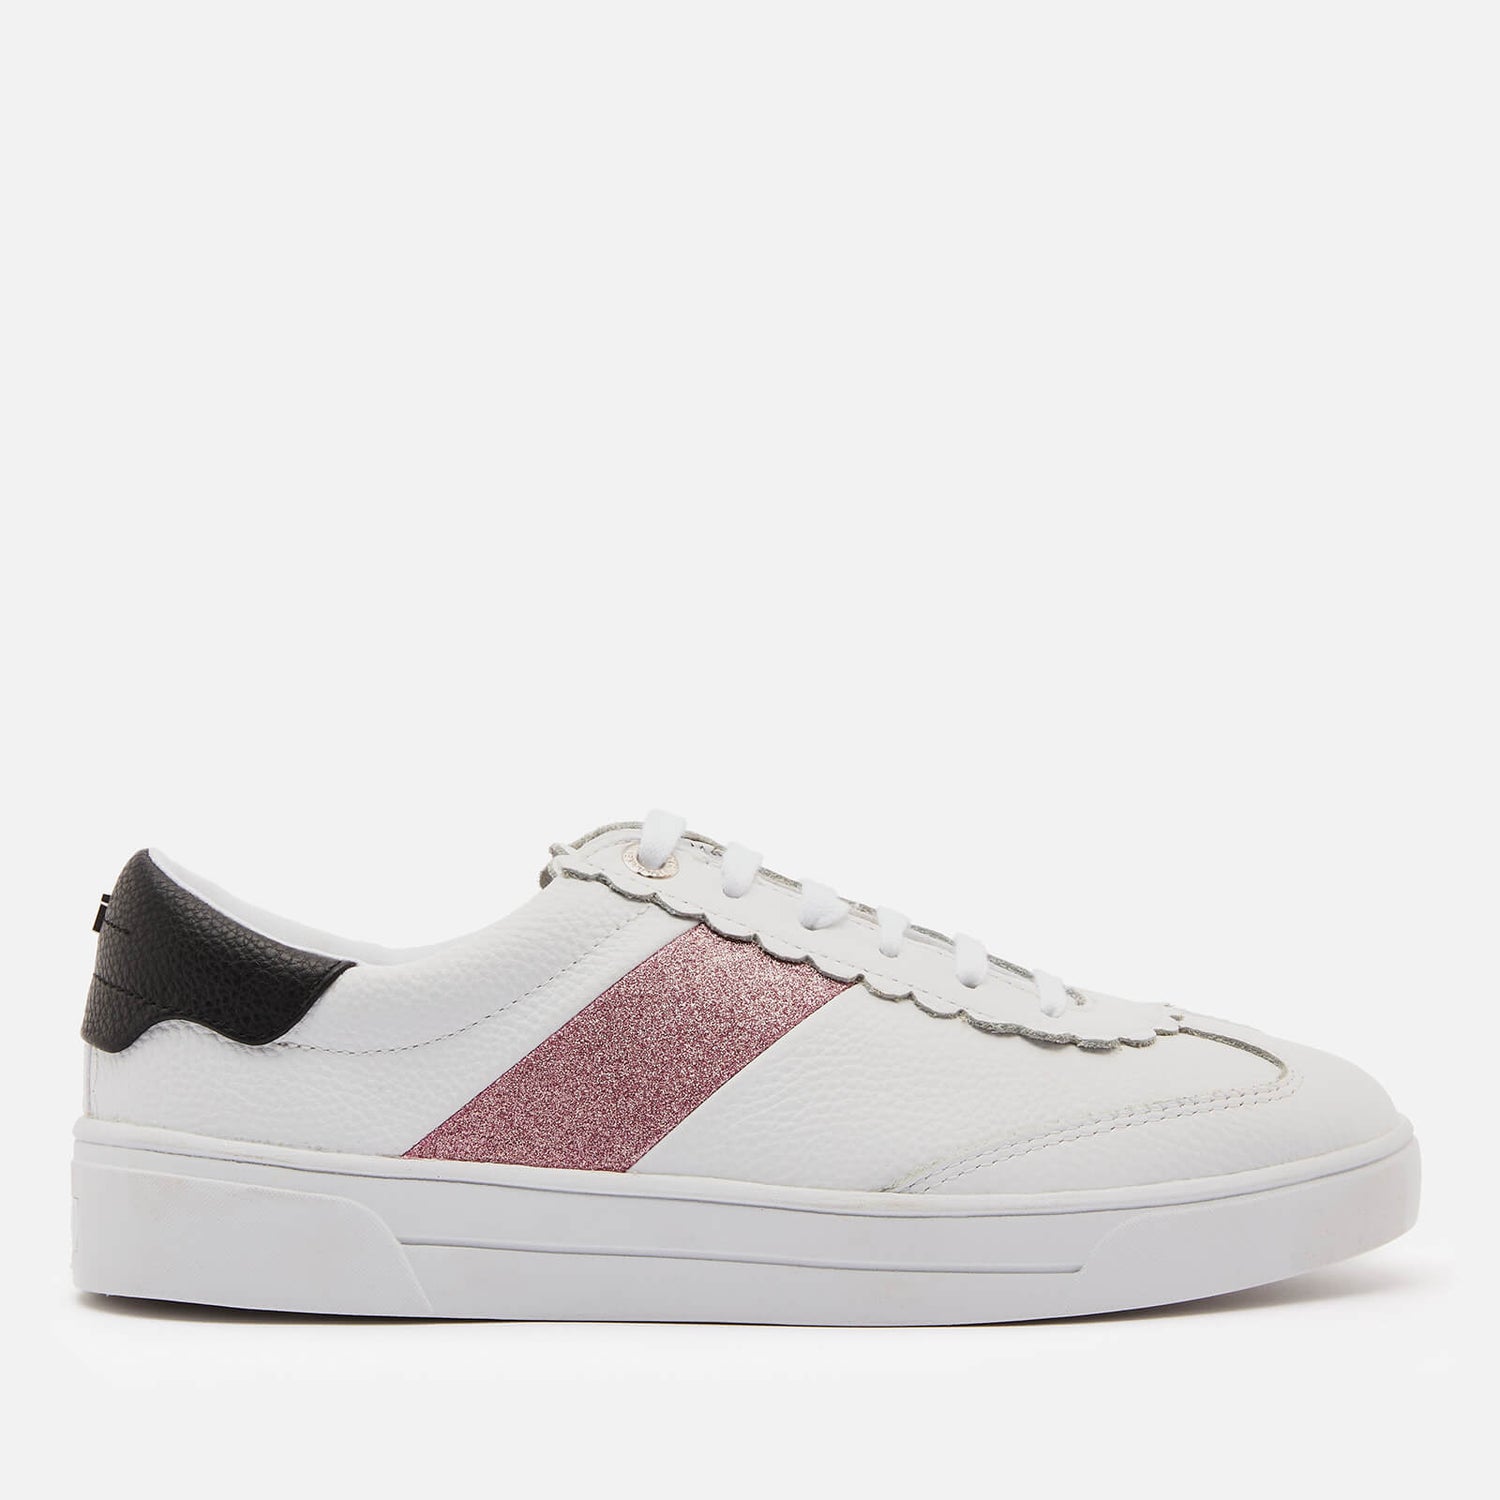 Ted Baker Women's Allva Leather Cupsole Trainers - White/Pink